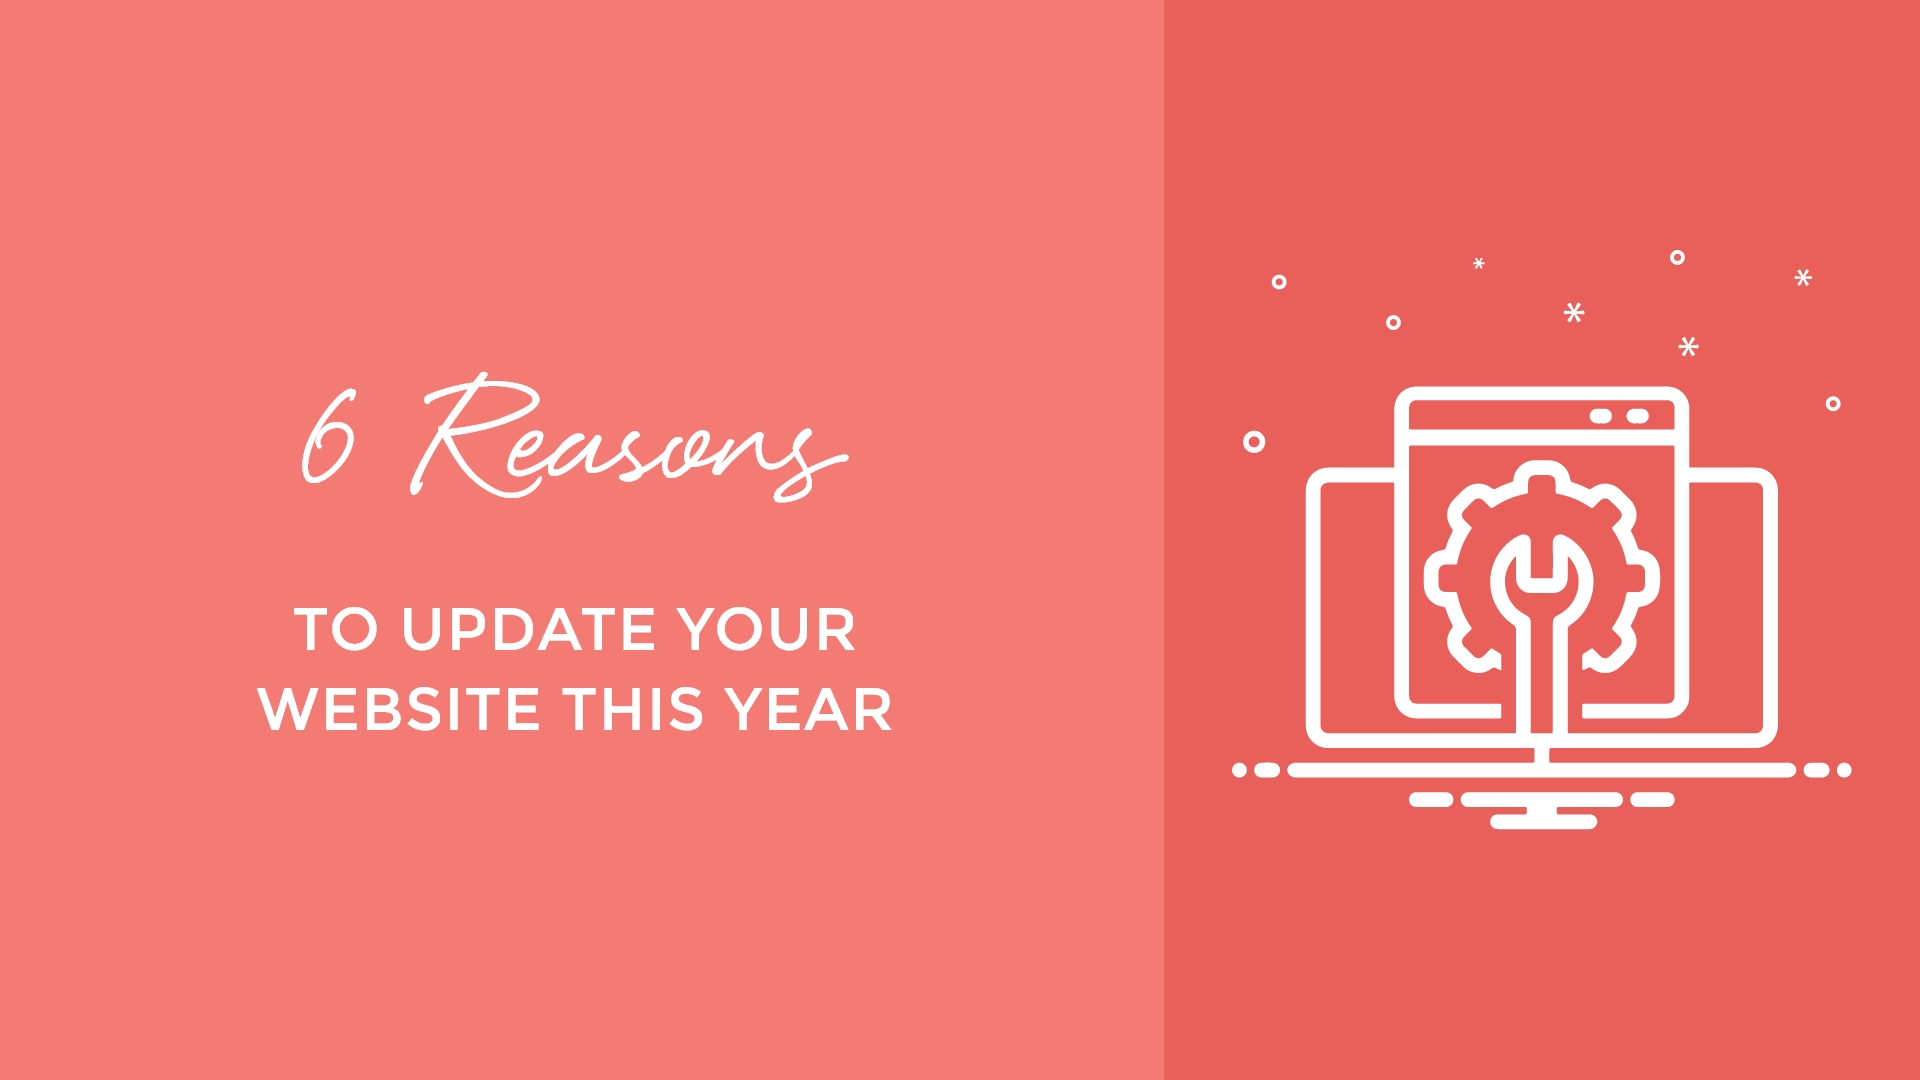 6 Reasons to Update Your Website This Year